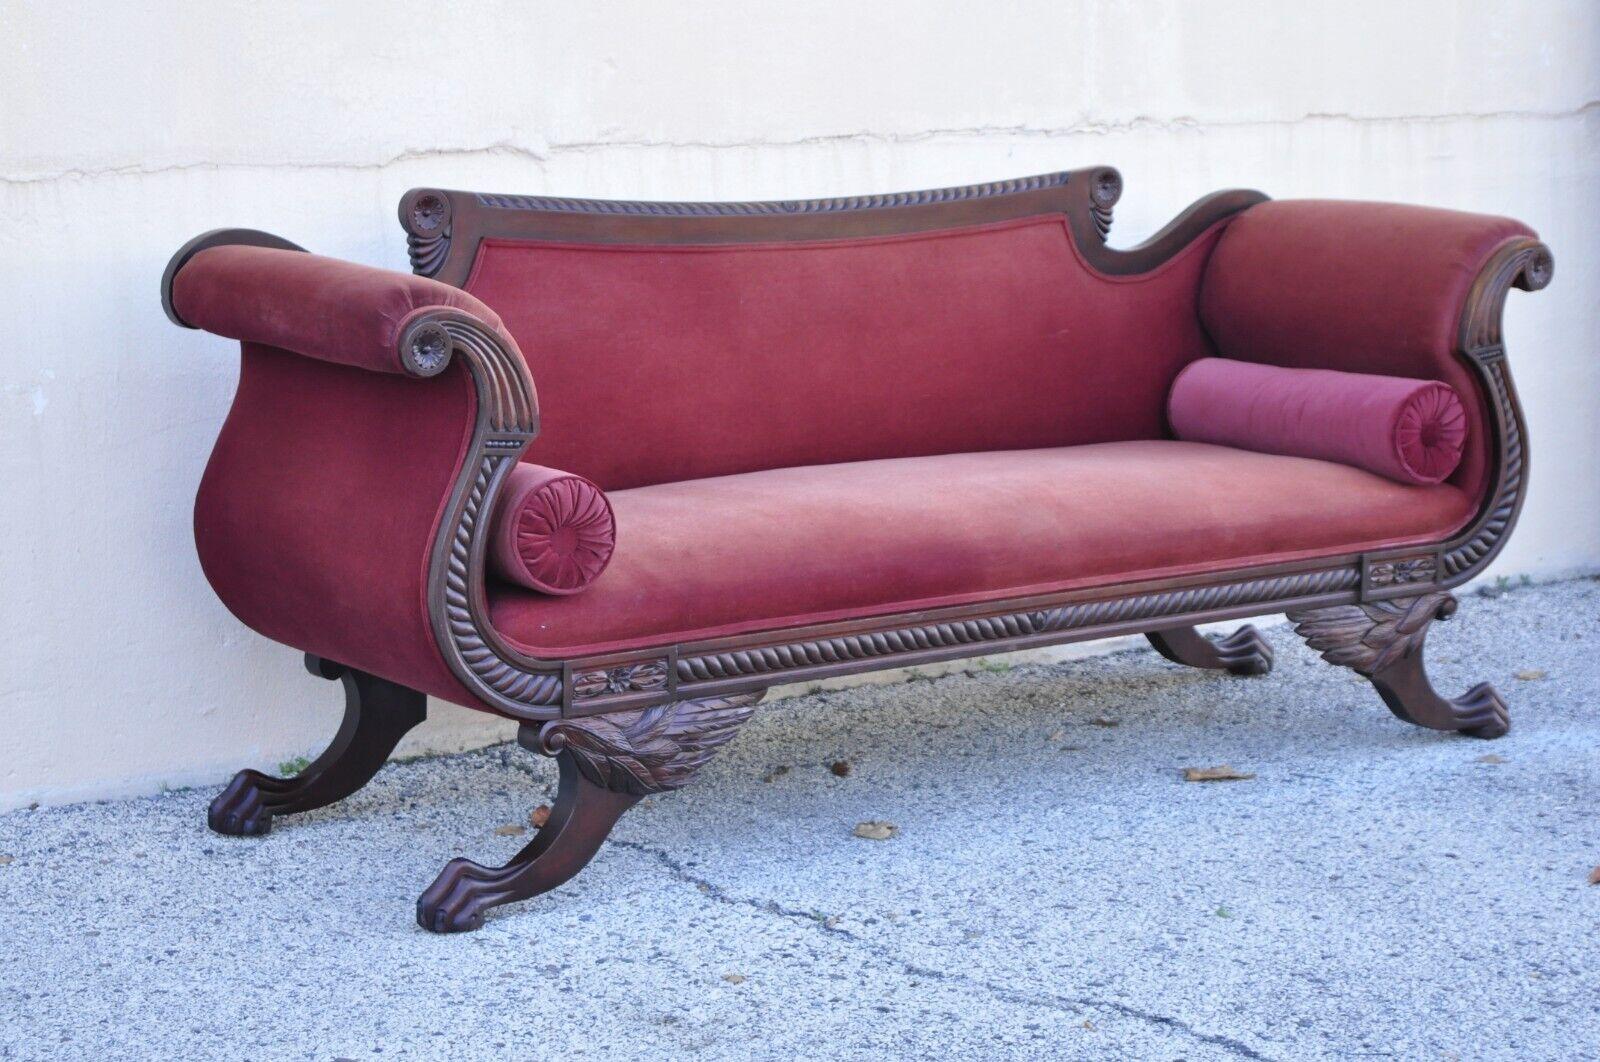 Antique American Empire Mahogany Frame Carved Paw Feet Scroll arm sofa. Item features scrolling carved arms, ornate paw feet, red mohair fabric, very nice vintage item, great style and form. Circa 19th Century. Measurements: 35